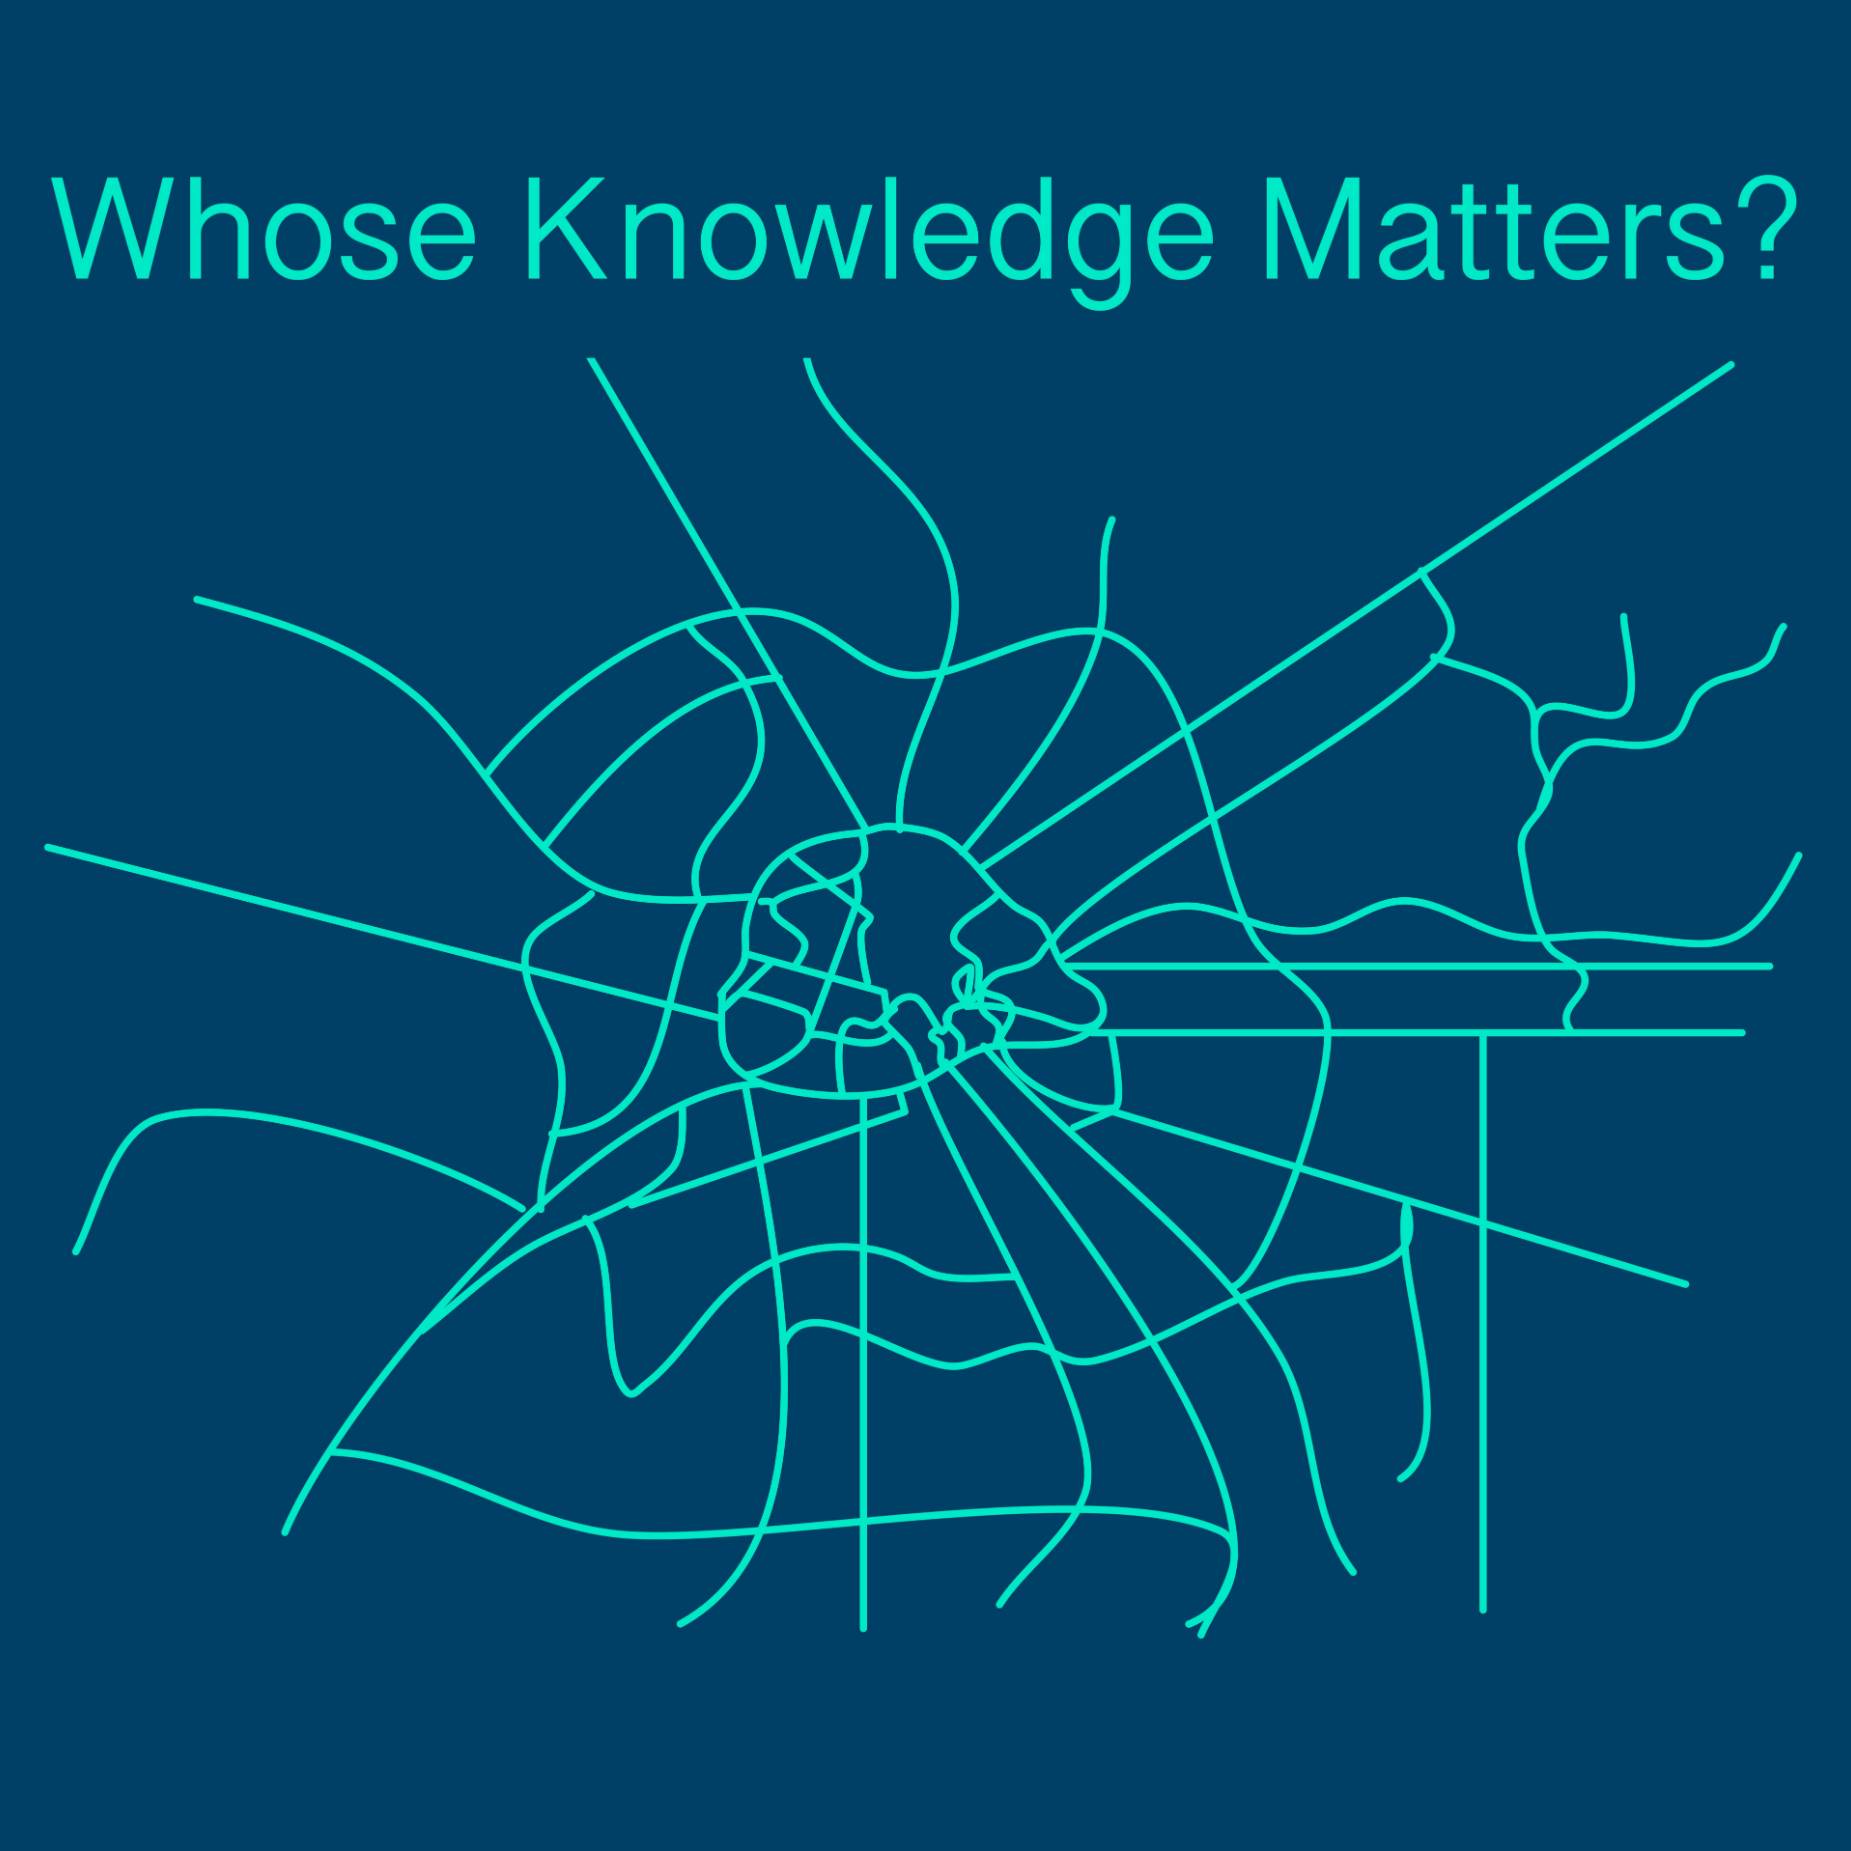 Whose Knowledge Matters?